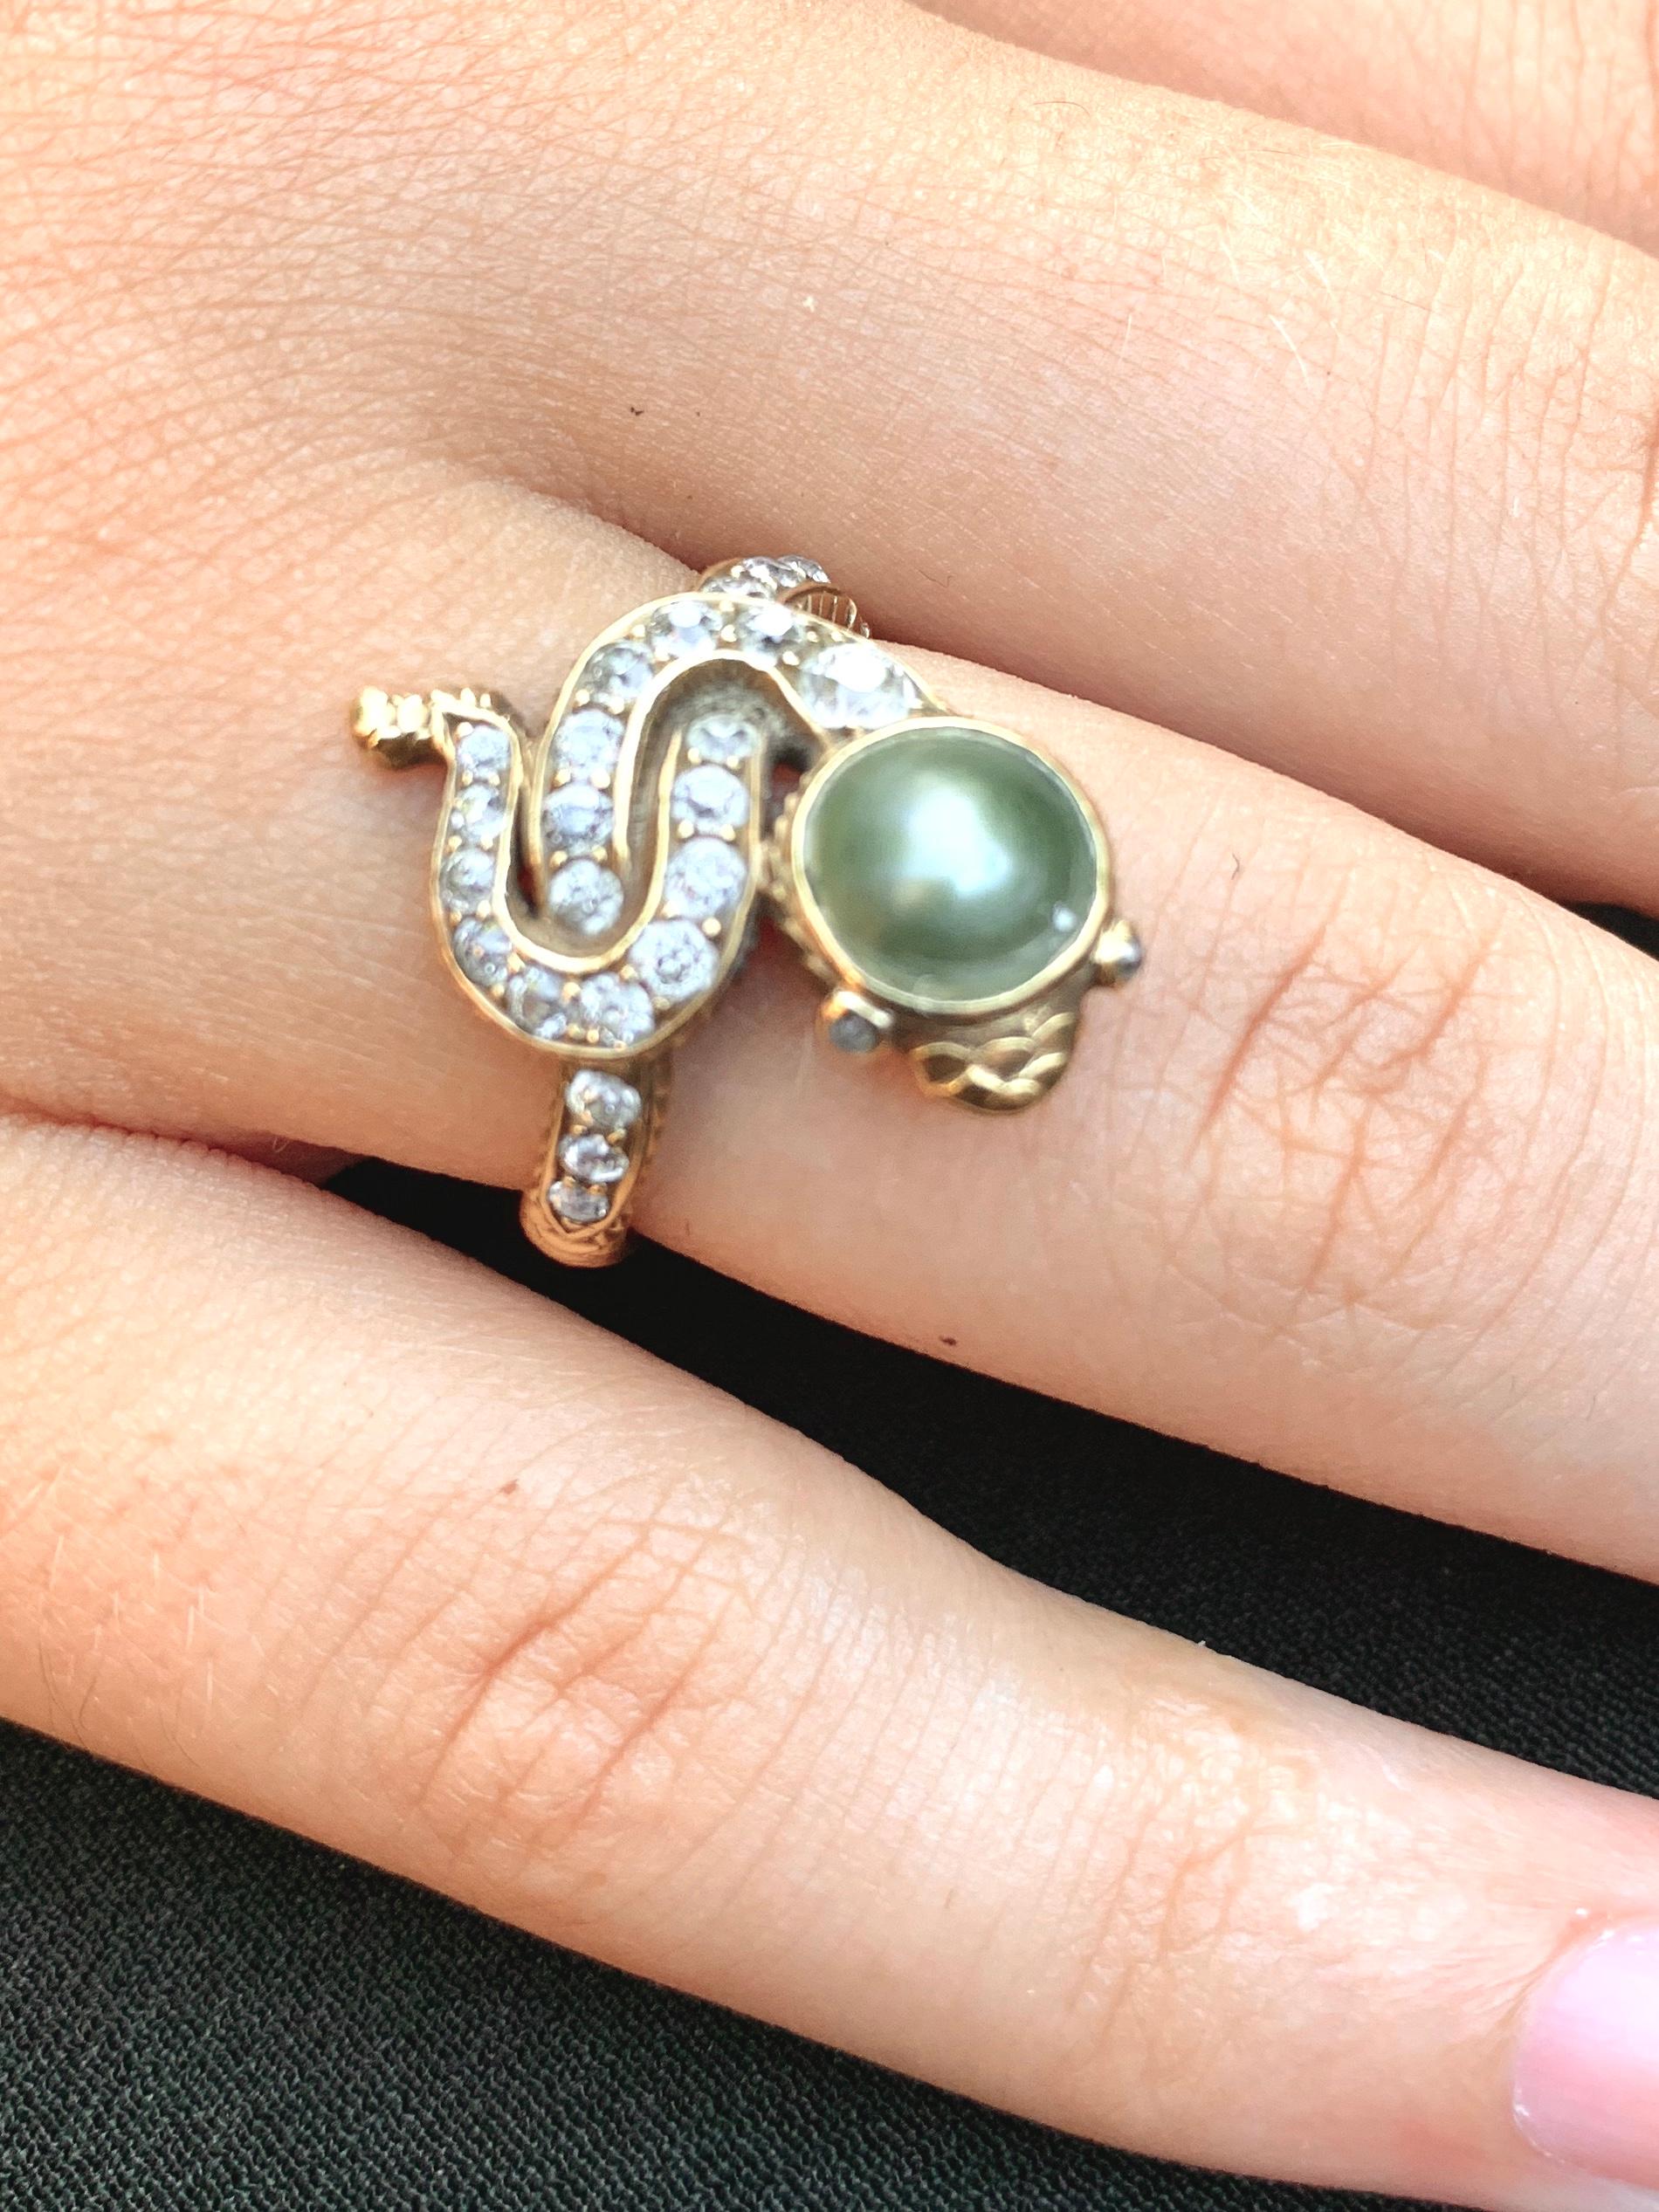 Rare antique Edwardian period fine natural pearl, diamond and 18K yellow gold snake ring
Early 20th Century
Featuring a dramatic lustrous natural deep grey pearl 6.5mm in diameter with fine quality F-G diamonds, approximately .70 TCW 
The snake with